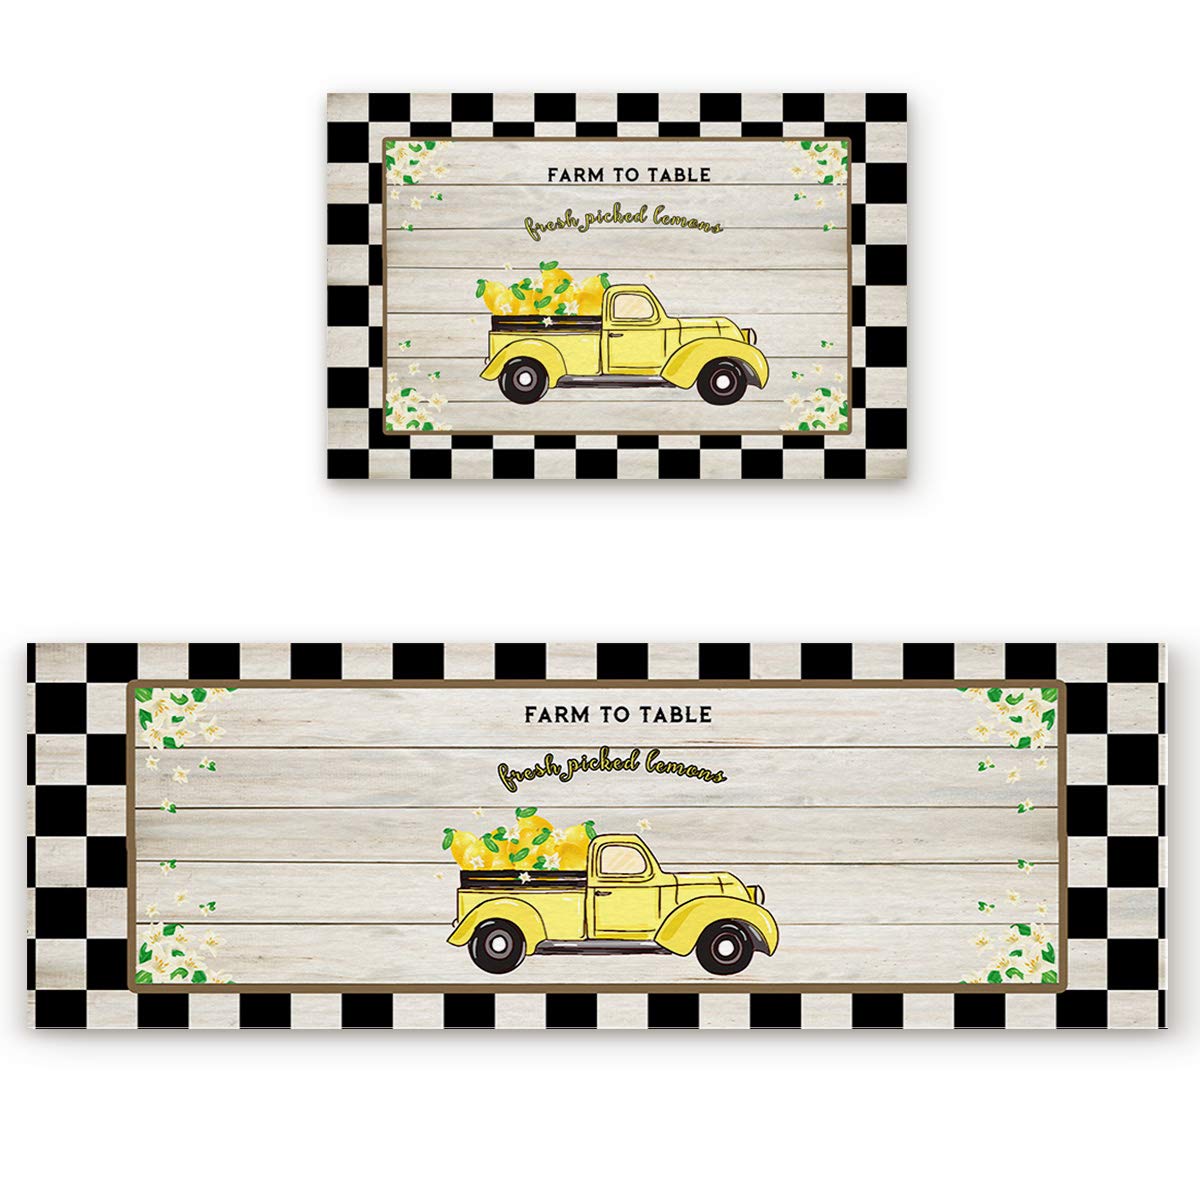 2 Pieces Kitchen Mat Set, Yellow Truck Loads Farm Picked Lemons on Black Checker, Non Slip Rubber Backing Bathroom Floor Mat Low Pile Machine Washable 15.7x23.6In + 15.7x47In